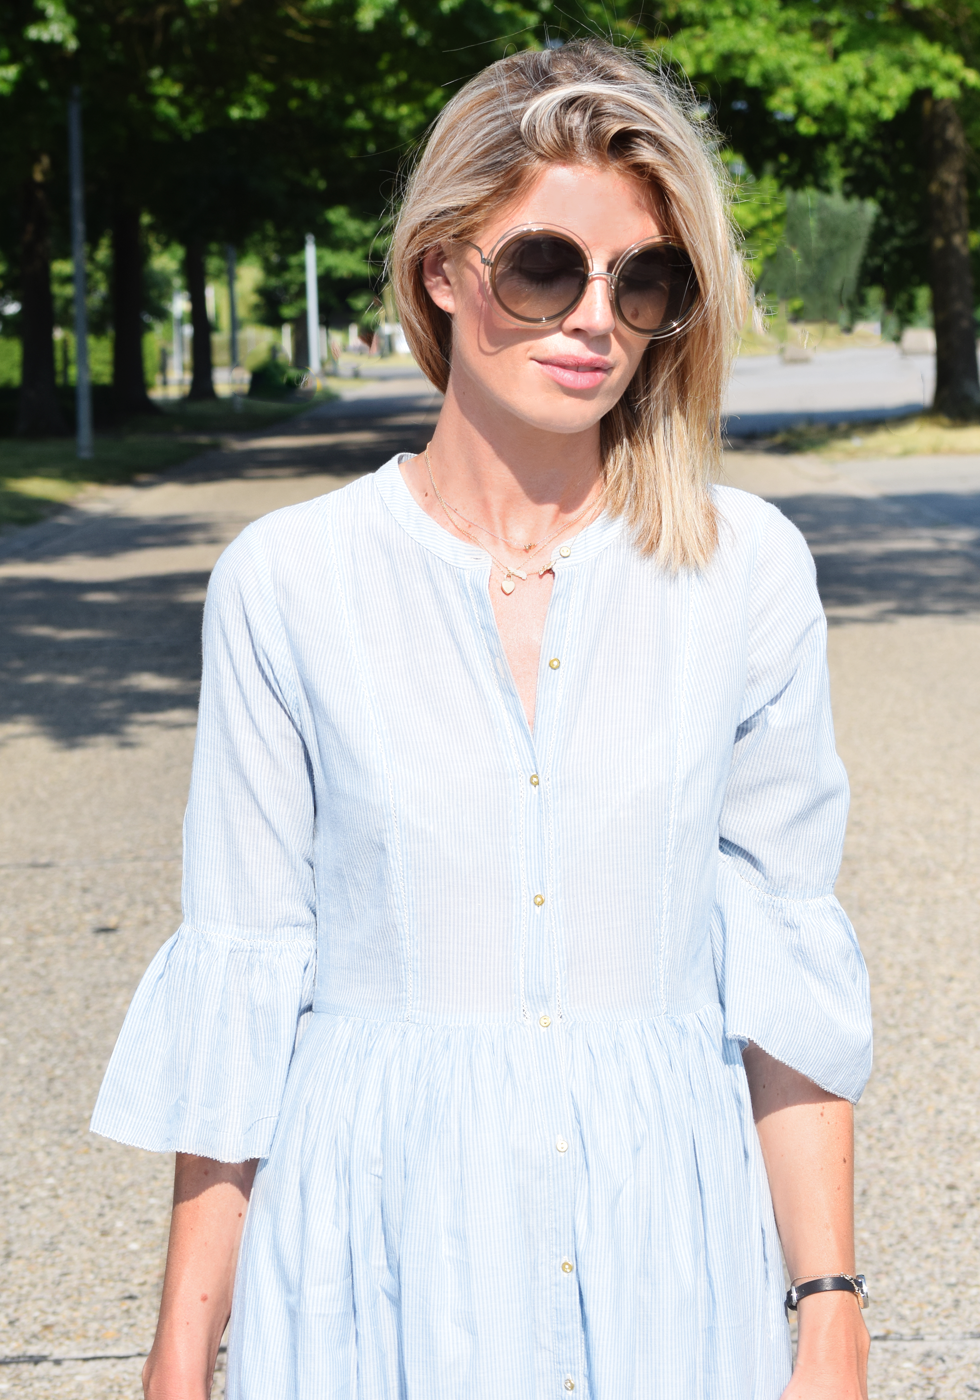 Outfit of the day, Ulla Johnson, Miu Miu, Minitials, Anne Zellien, Tiffany Co, Chloé, Dewolf, Vanessa Bruno, ootd, style, fashion, look, blogger, stylist